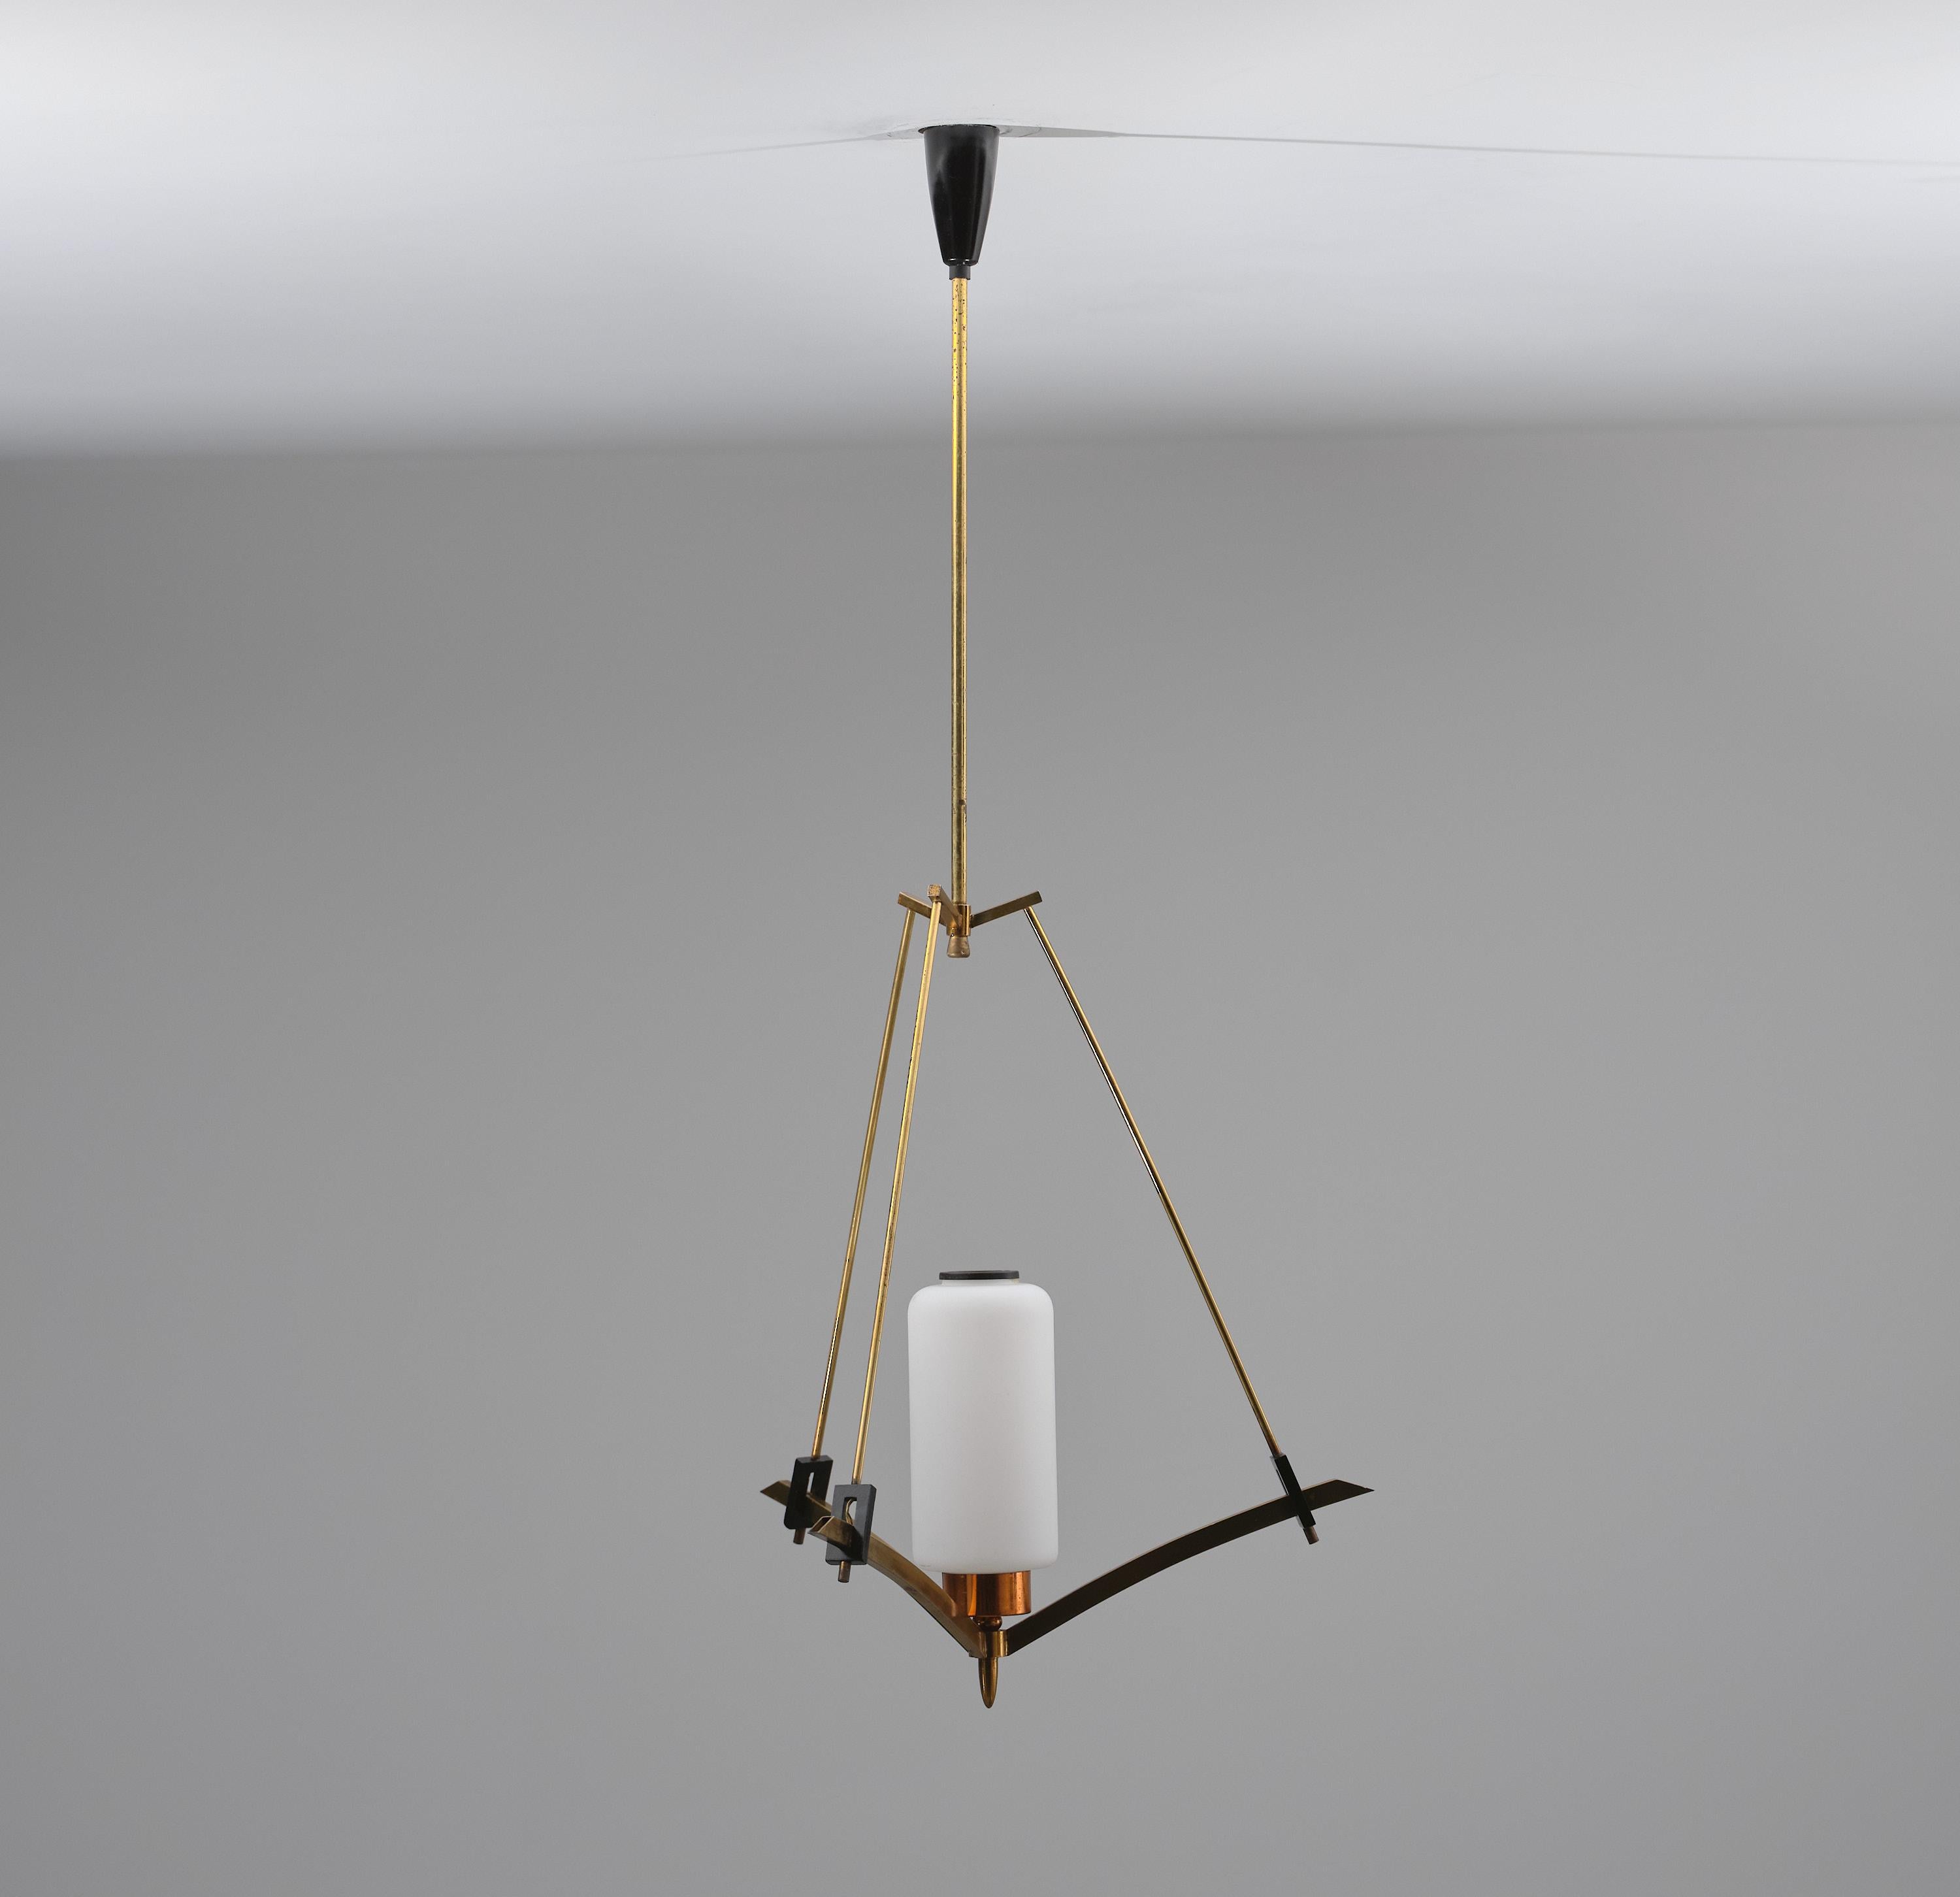 Presenting an exquisite Italian pendant chandelier, meticulously crafted to captivate and illuminate with its opulent features.

This remarkable lighting fixture showcases a stunning fusion of opaline glass, original brass with its timeless patina,